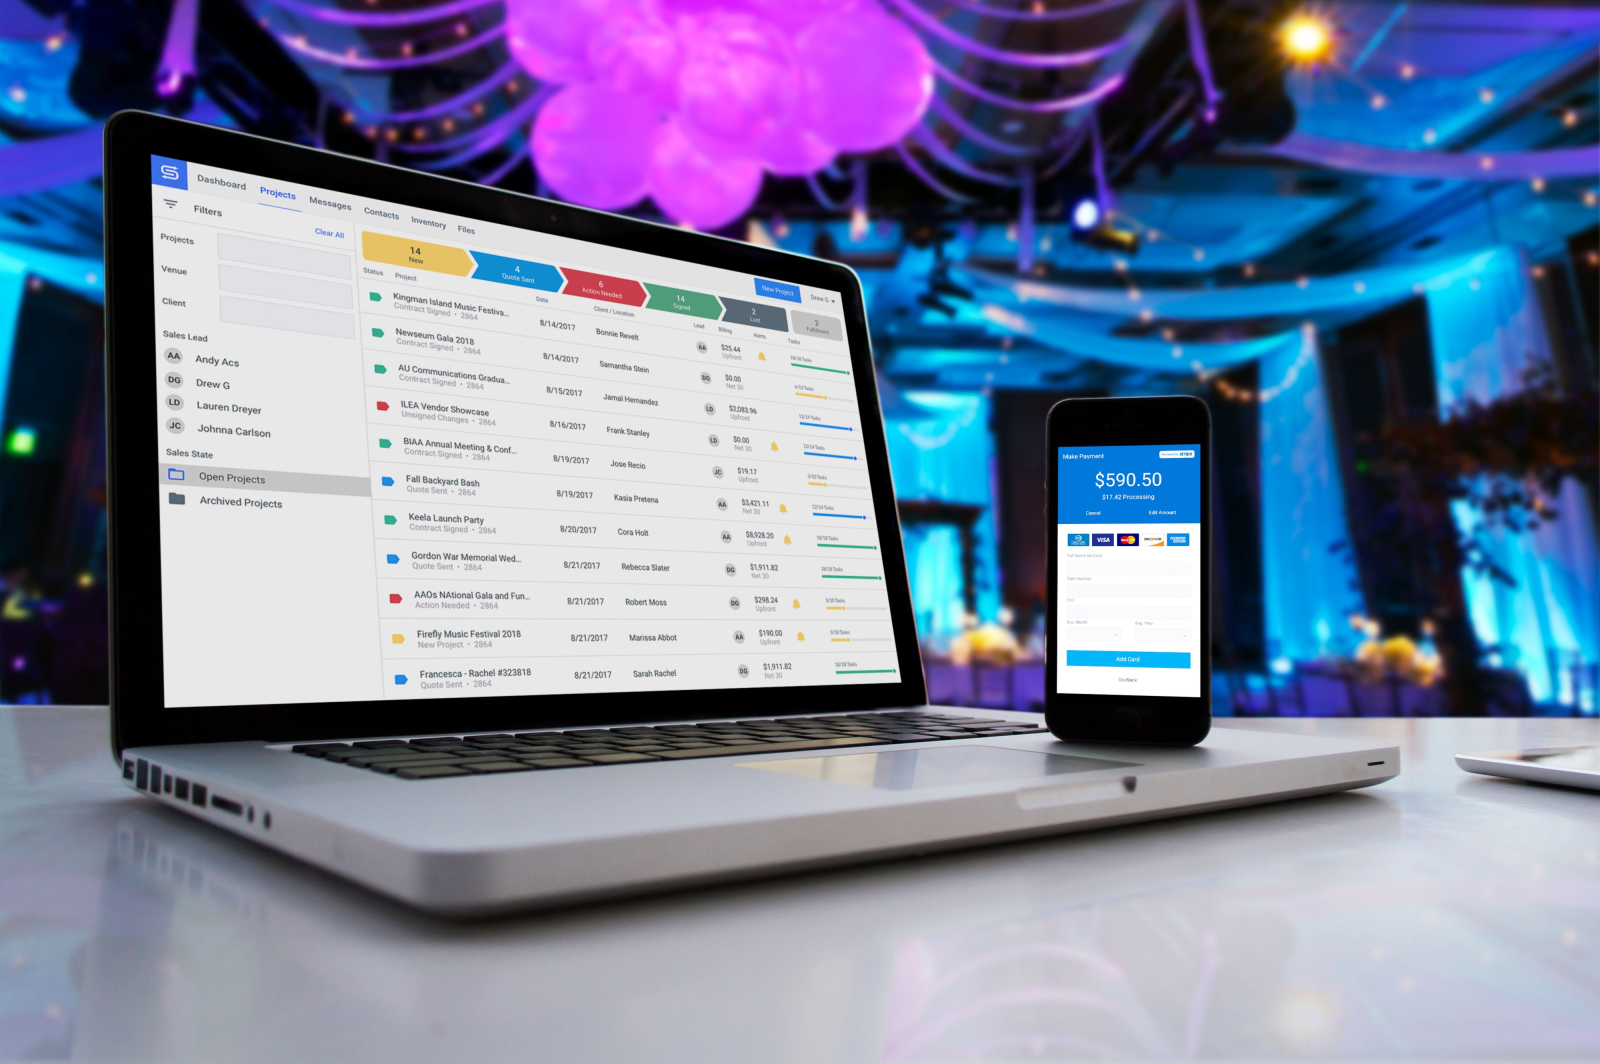 Goodshuffle Pro was designed by event professionals, for event professionals.